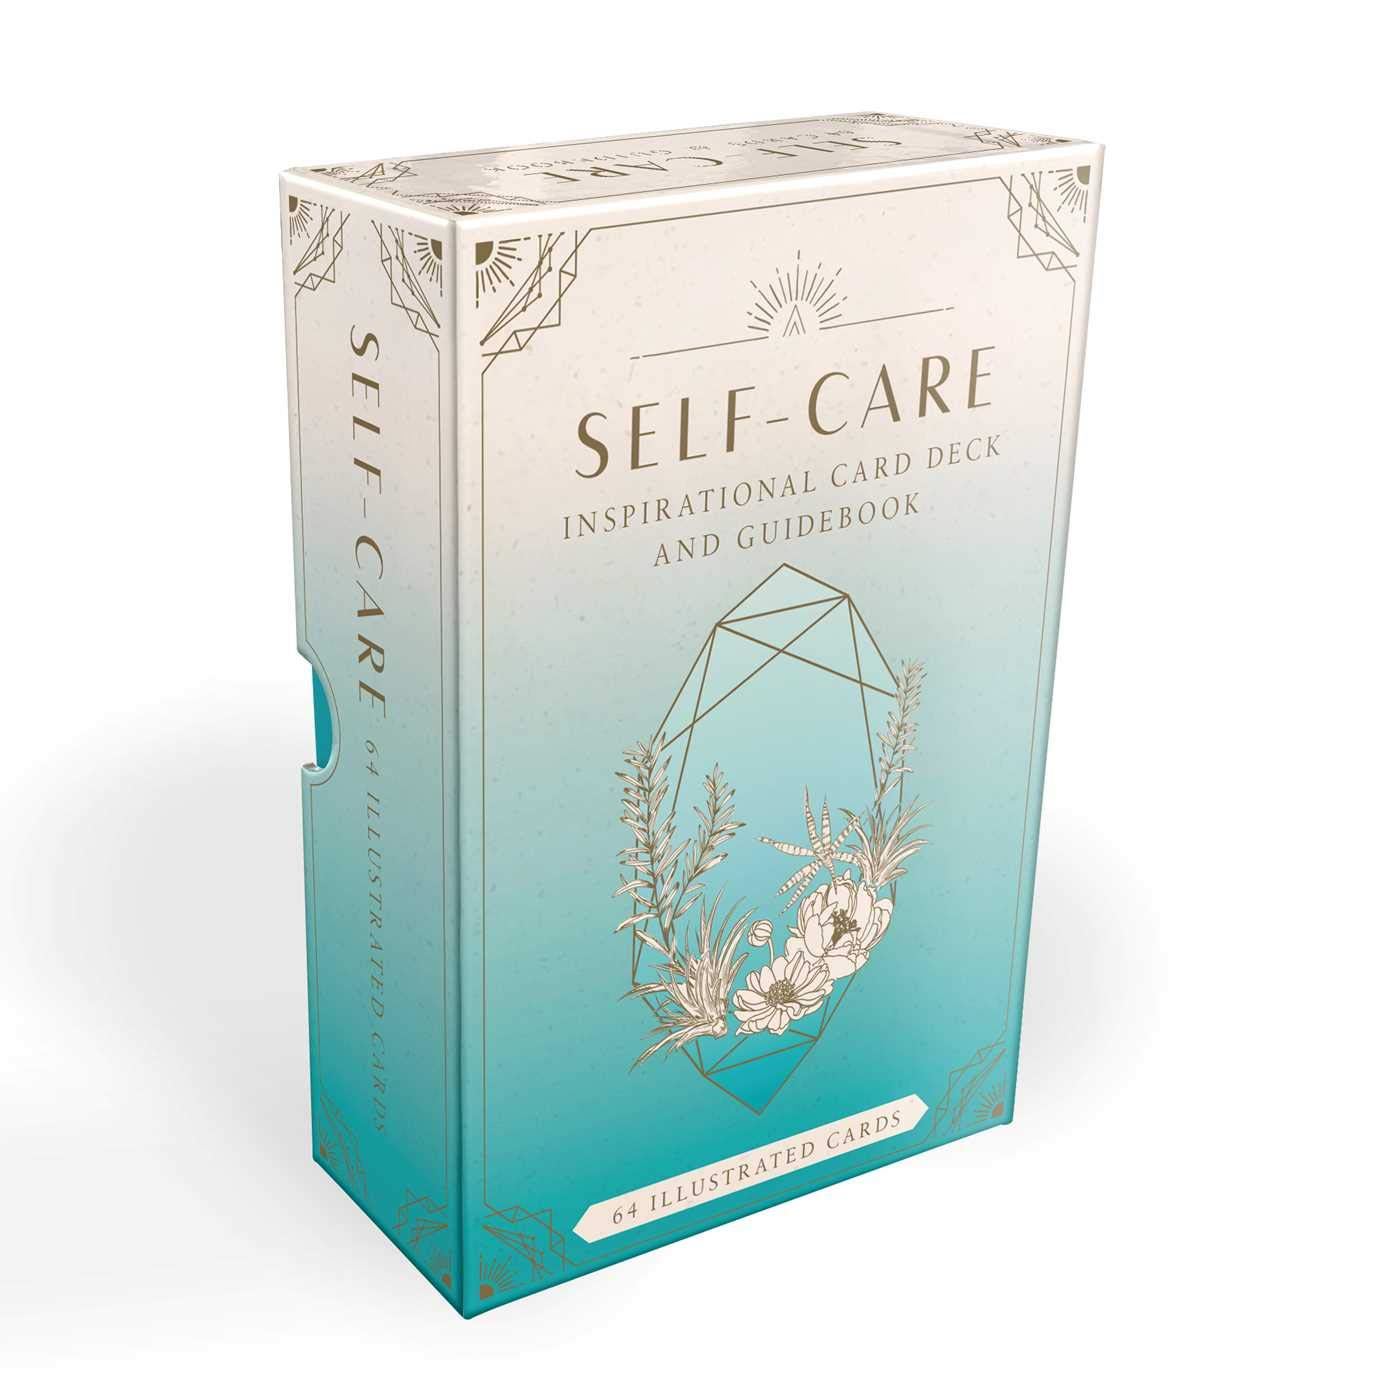 Self-Care: Inspirational Card Deck and Guidebook